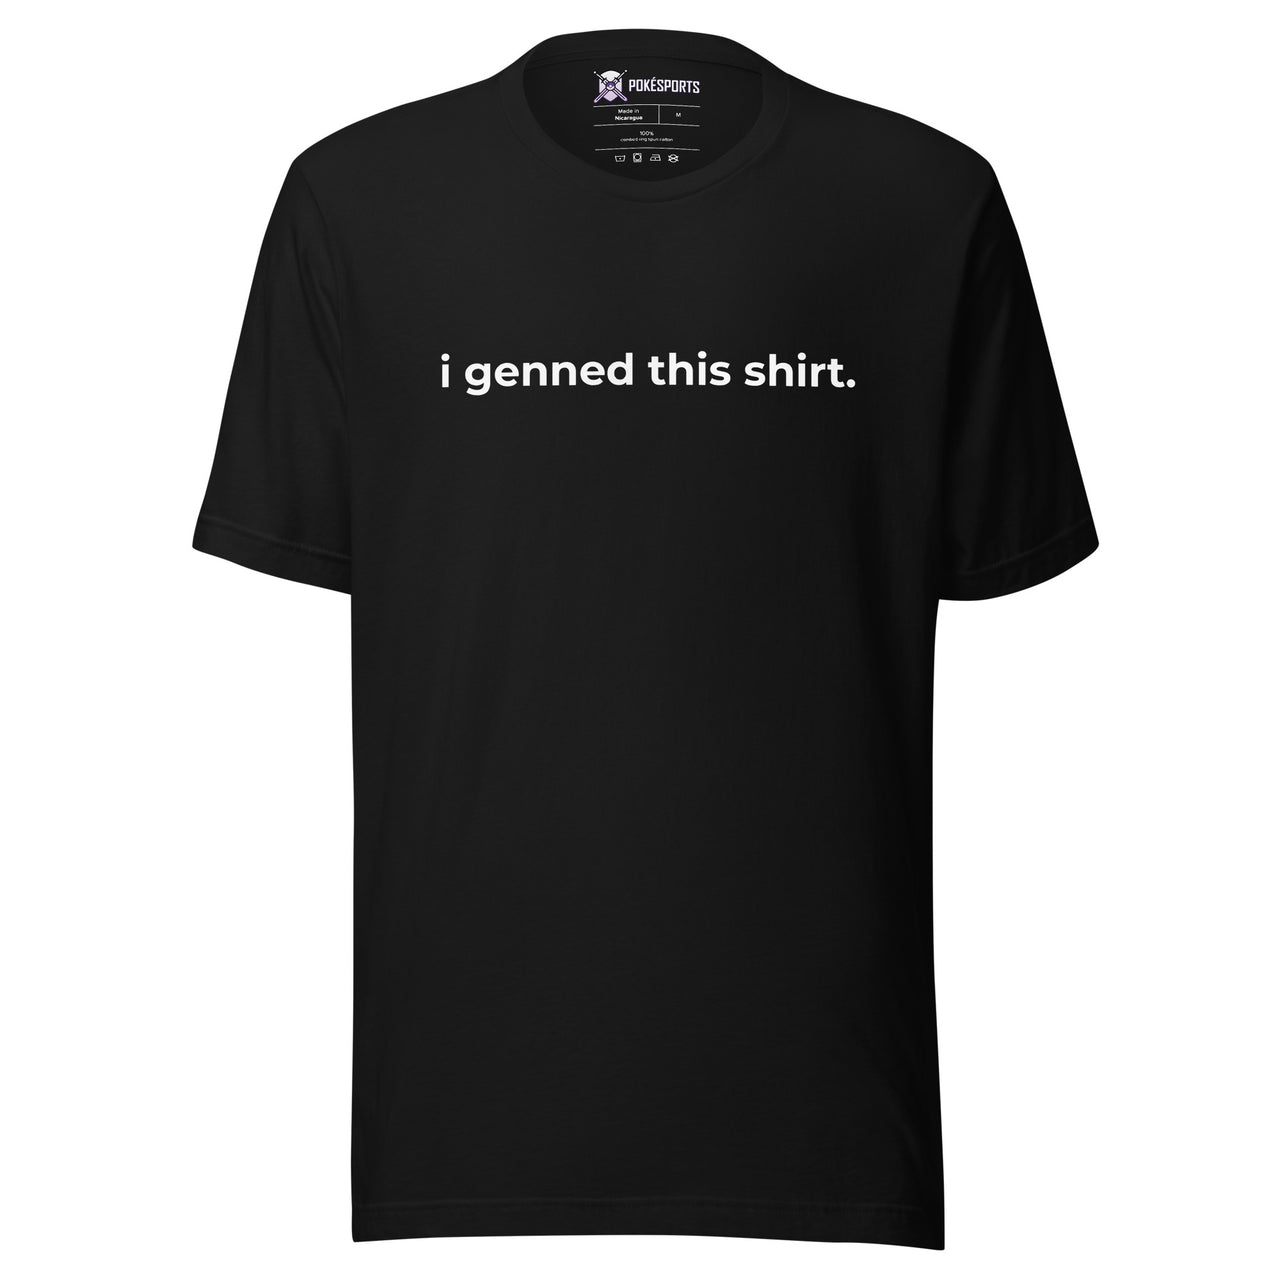 i genned this shirt (light text)